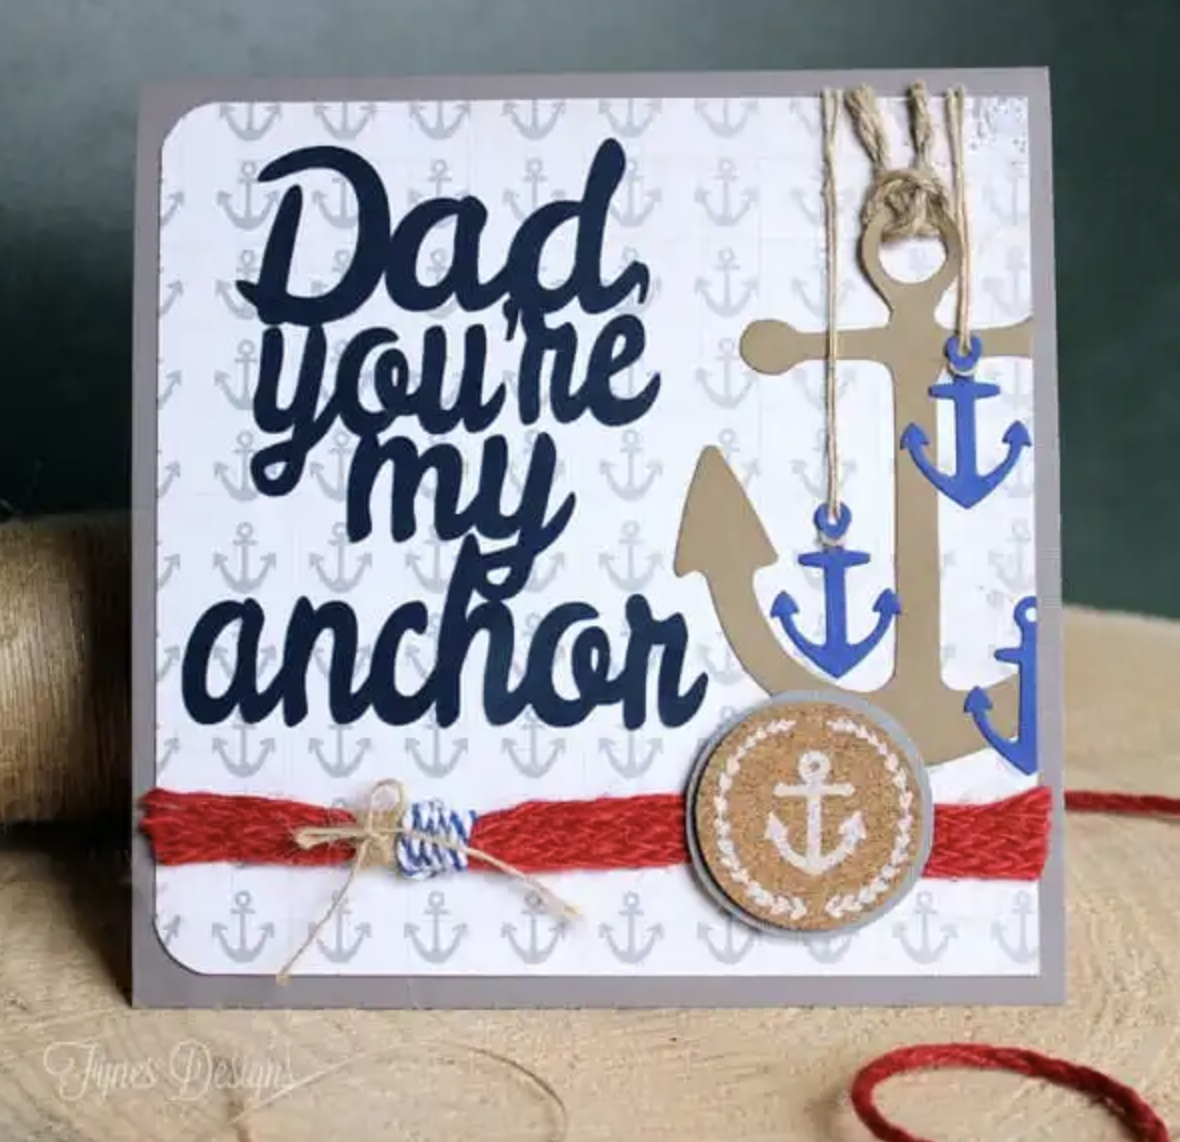 25 Happy Father's Day Messages & Greetings (+Templates)